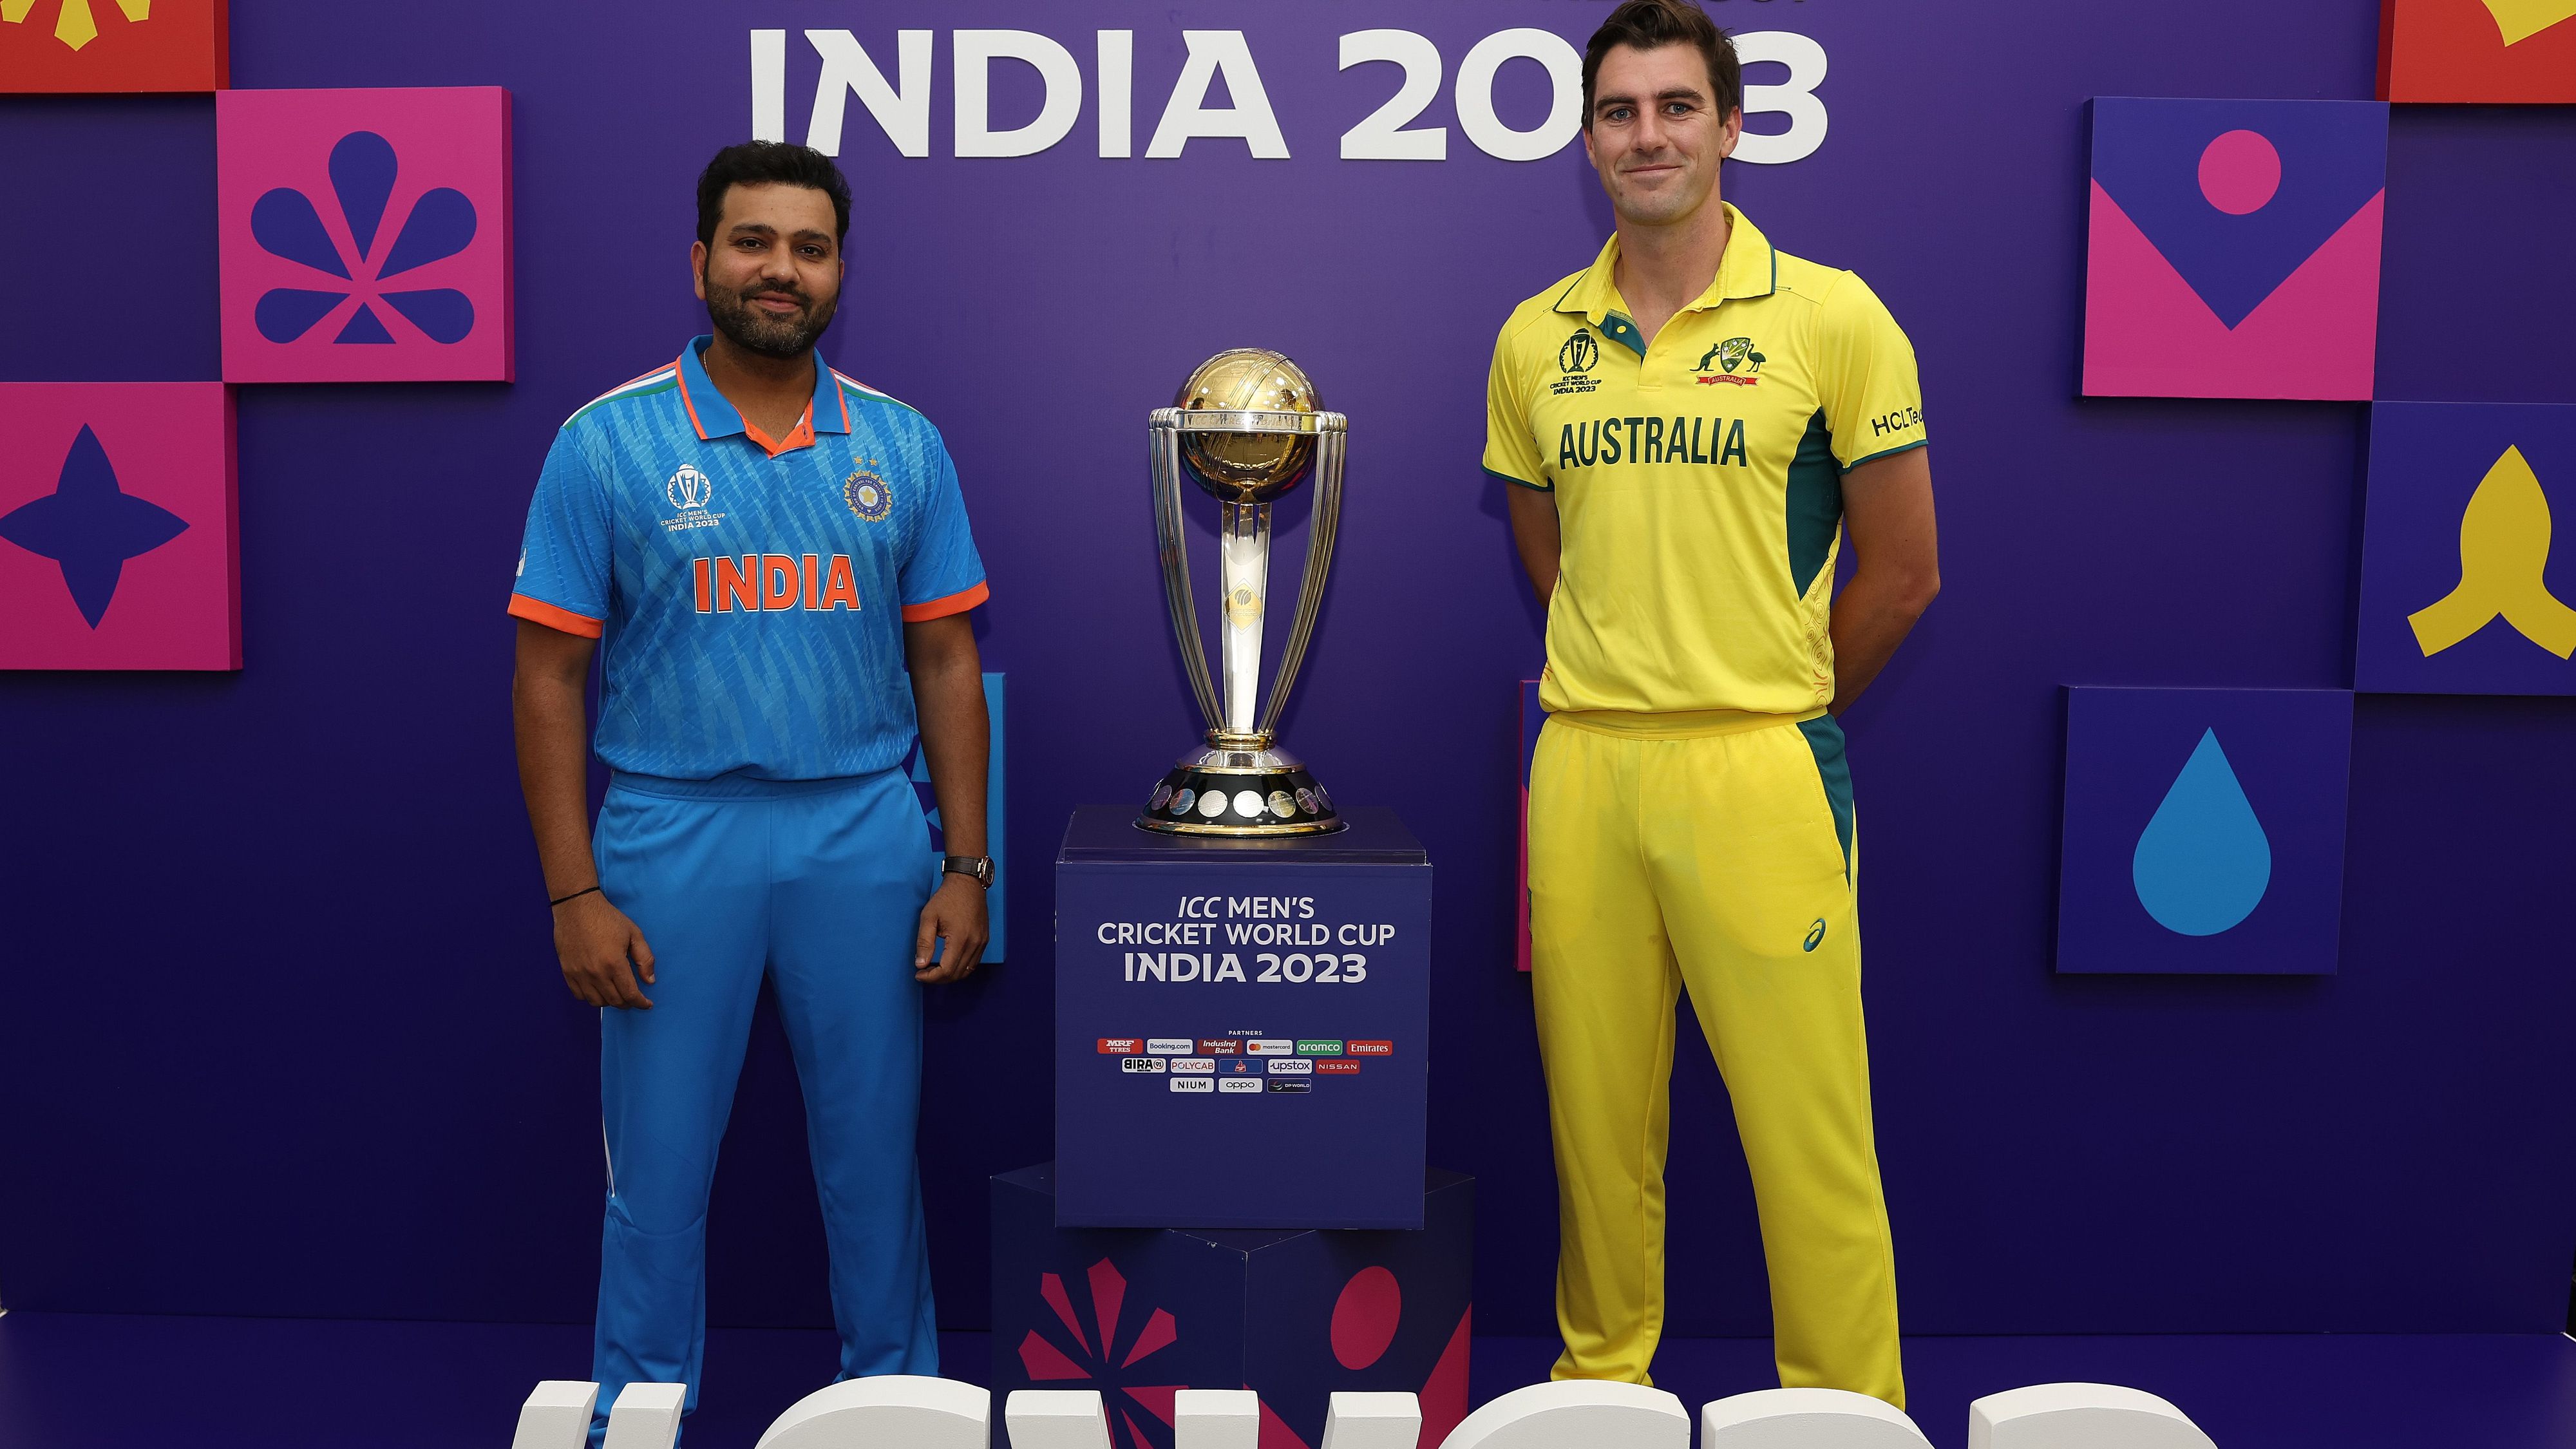 India take on Australia in the 2023 Cricket World Cup final